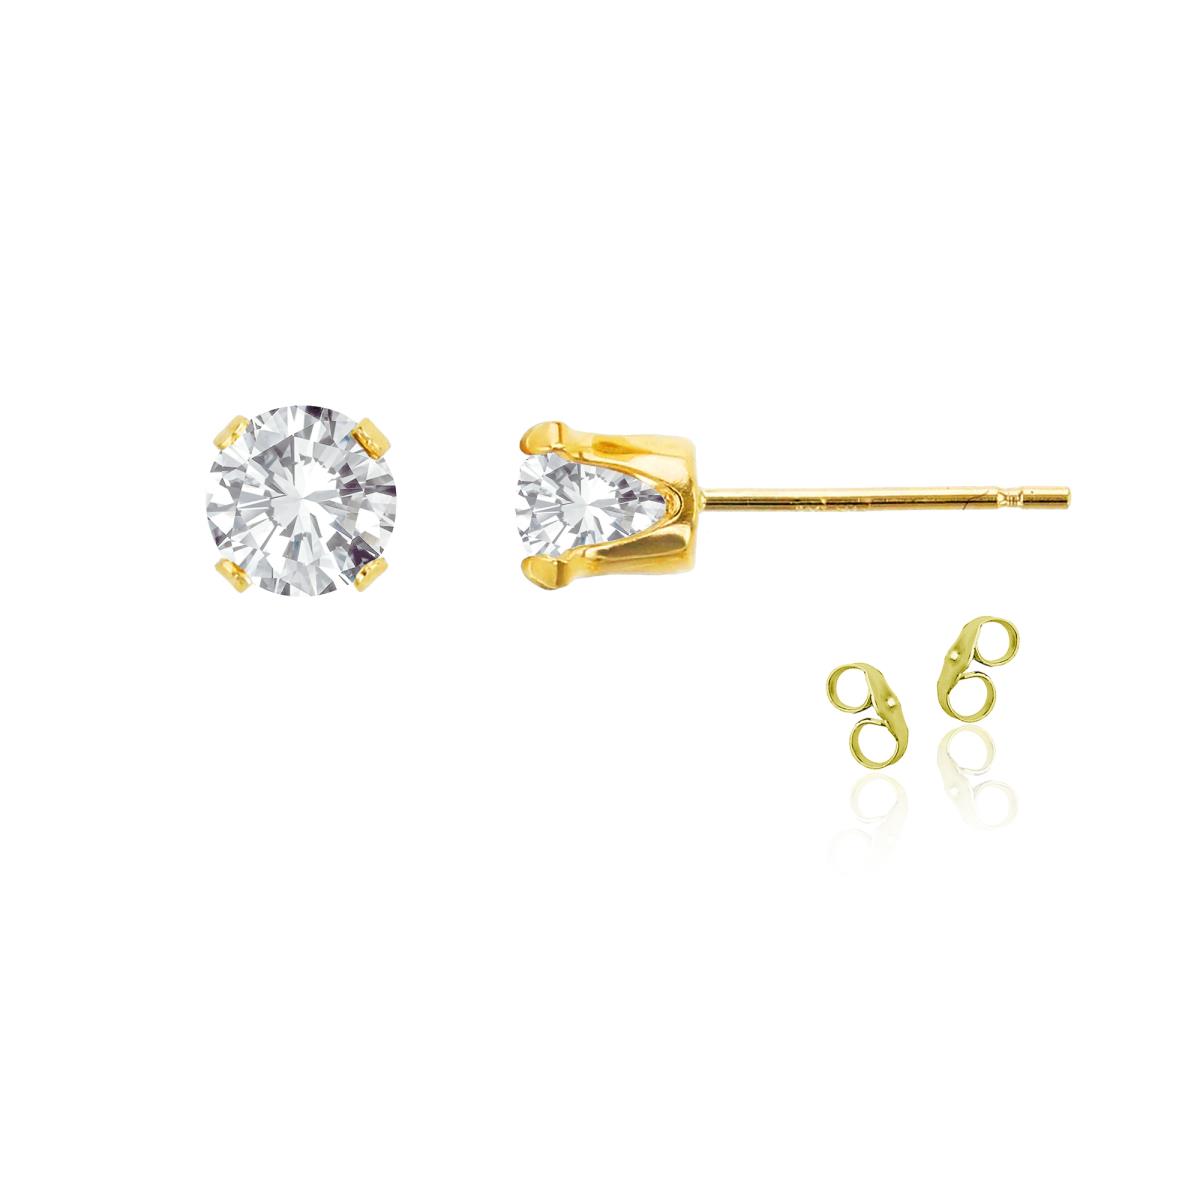 Sterling Silver Yellow 5mm Round White Topaz Stud Earring with Clutch